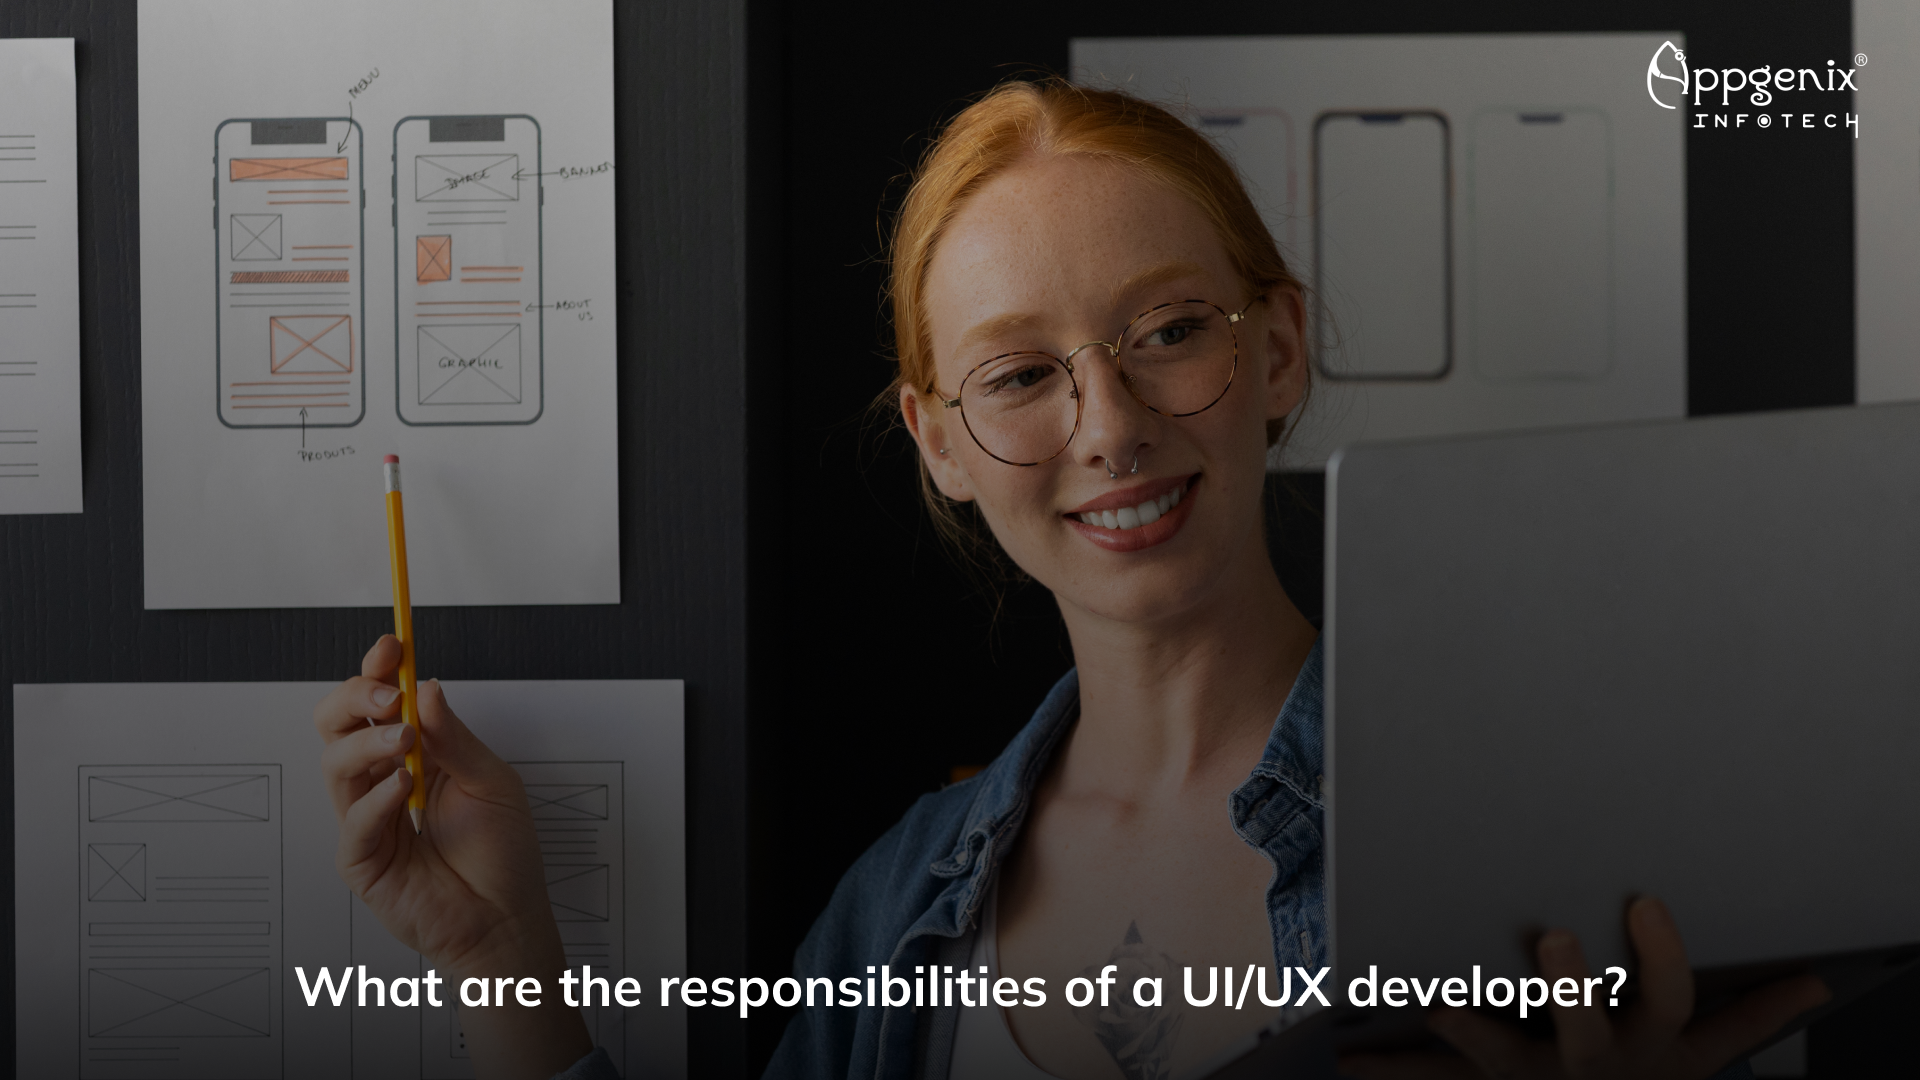 What are the responsibilities of a UI/UX developer?